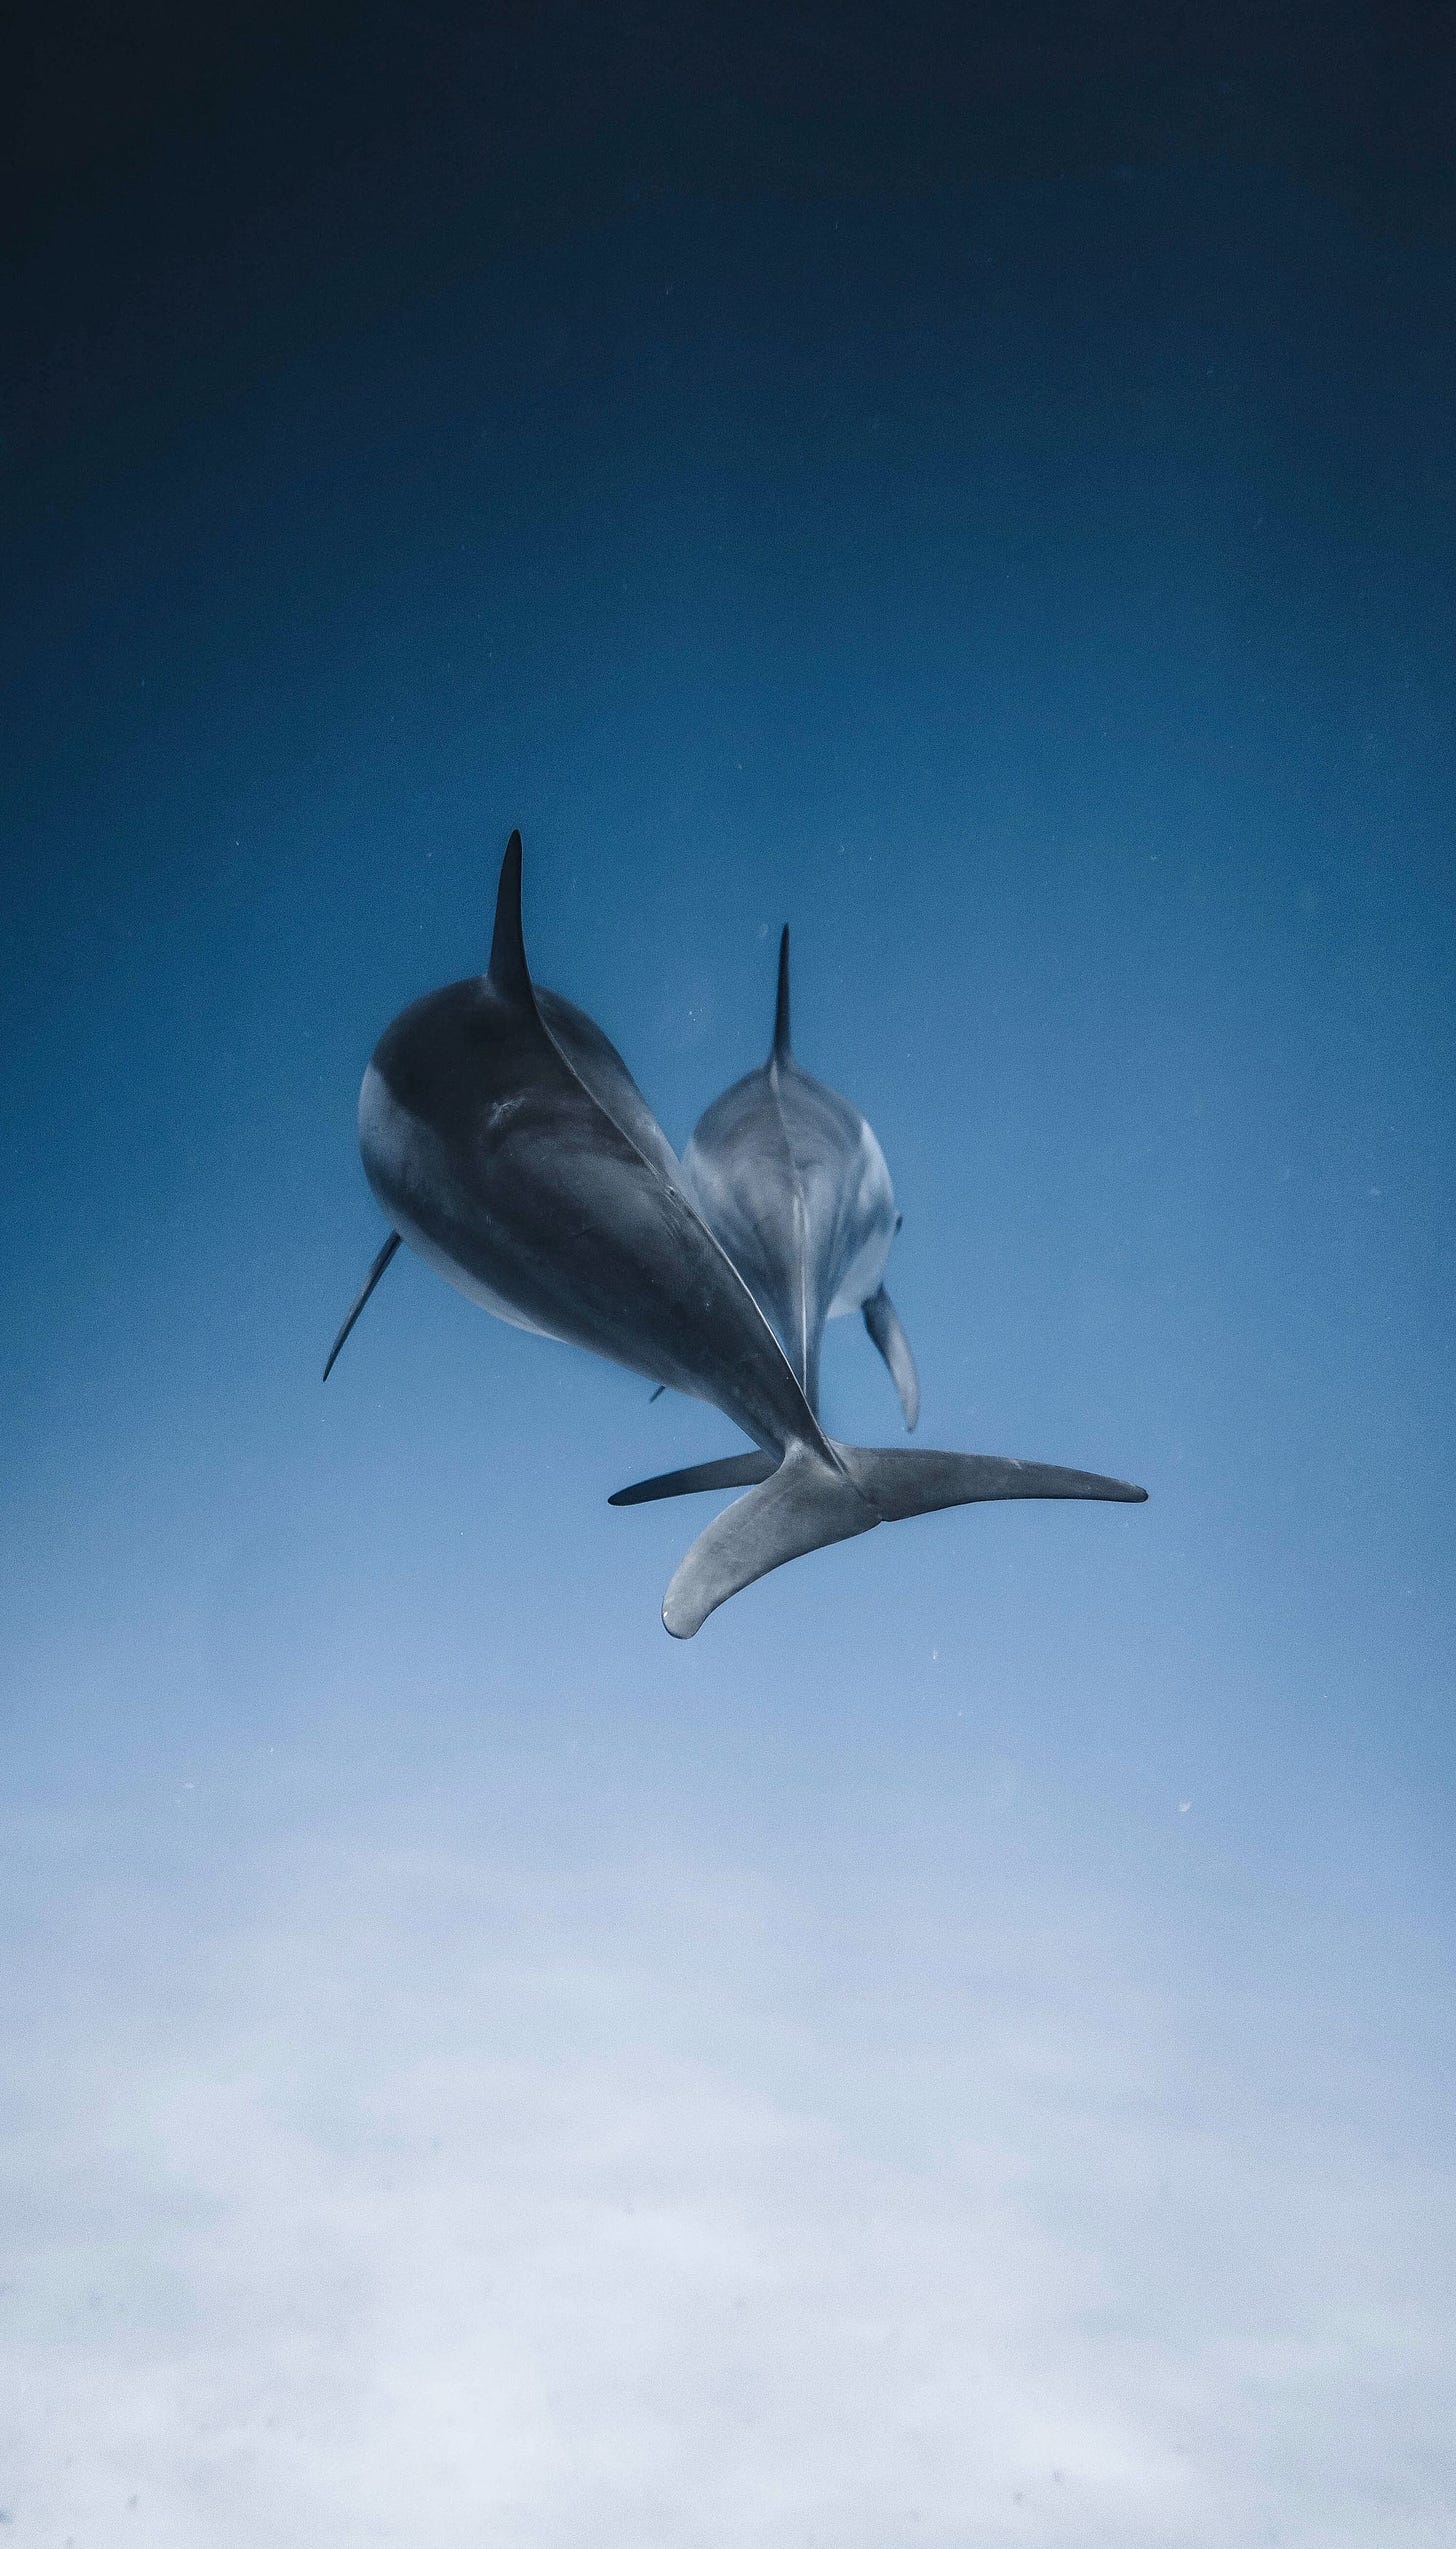 Photo of dolphins swimming away from the camera by Daniel Torobekov